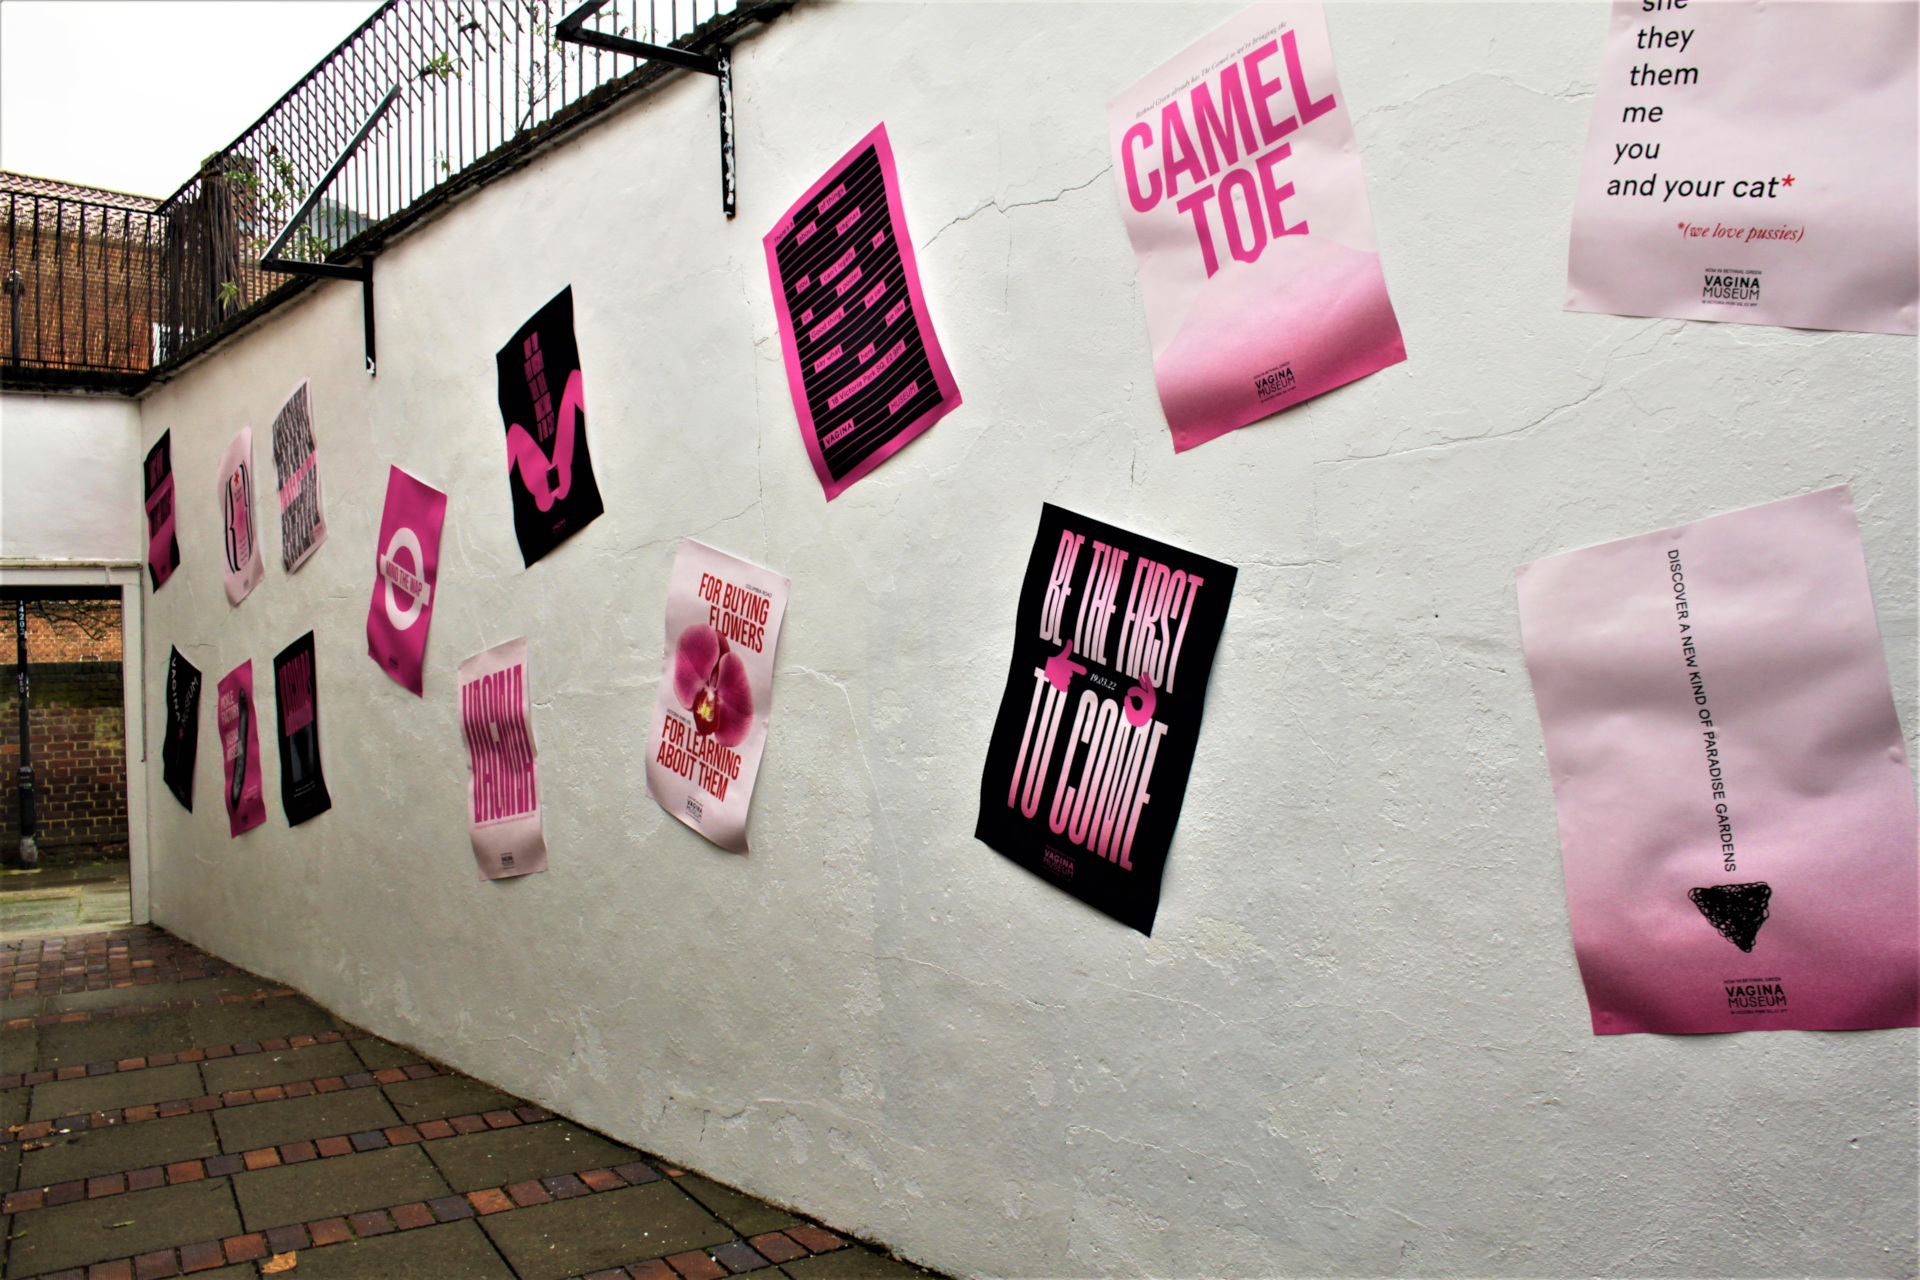 Wall plastered with pink posters